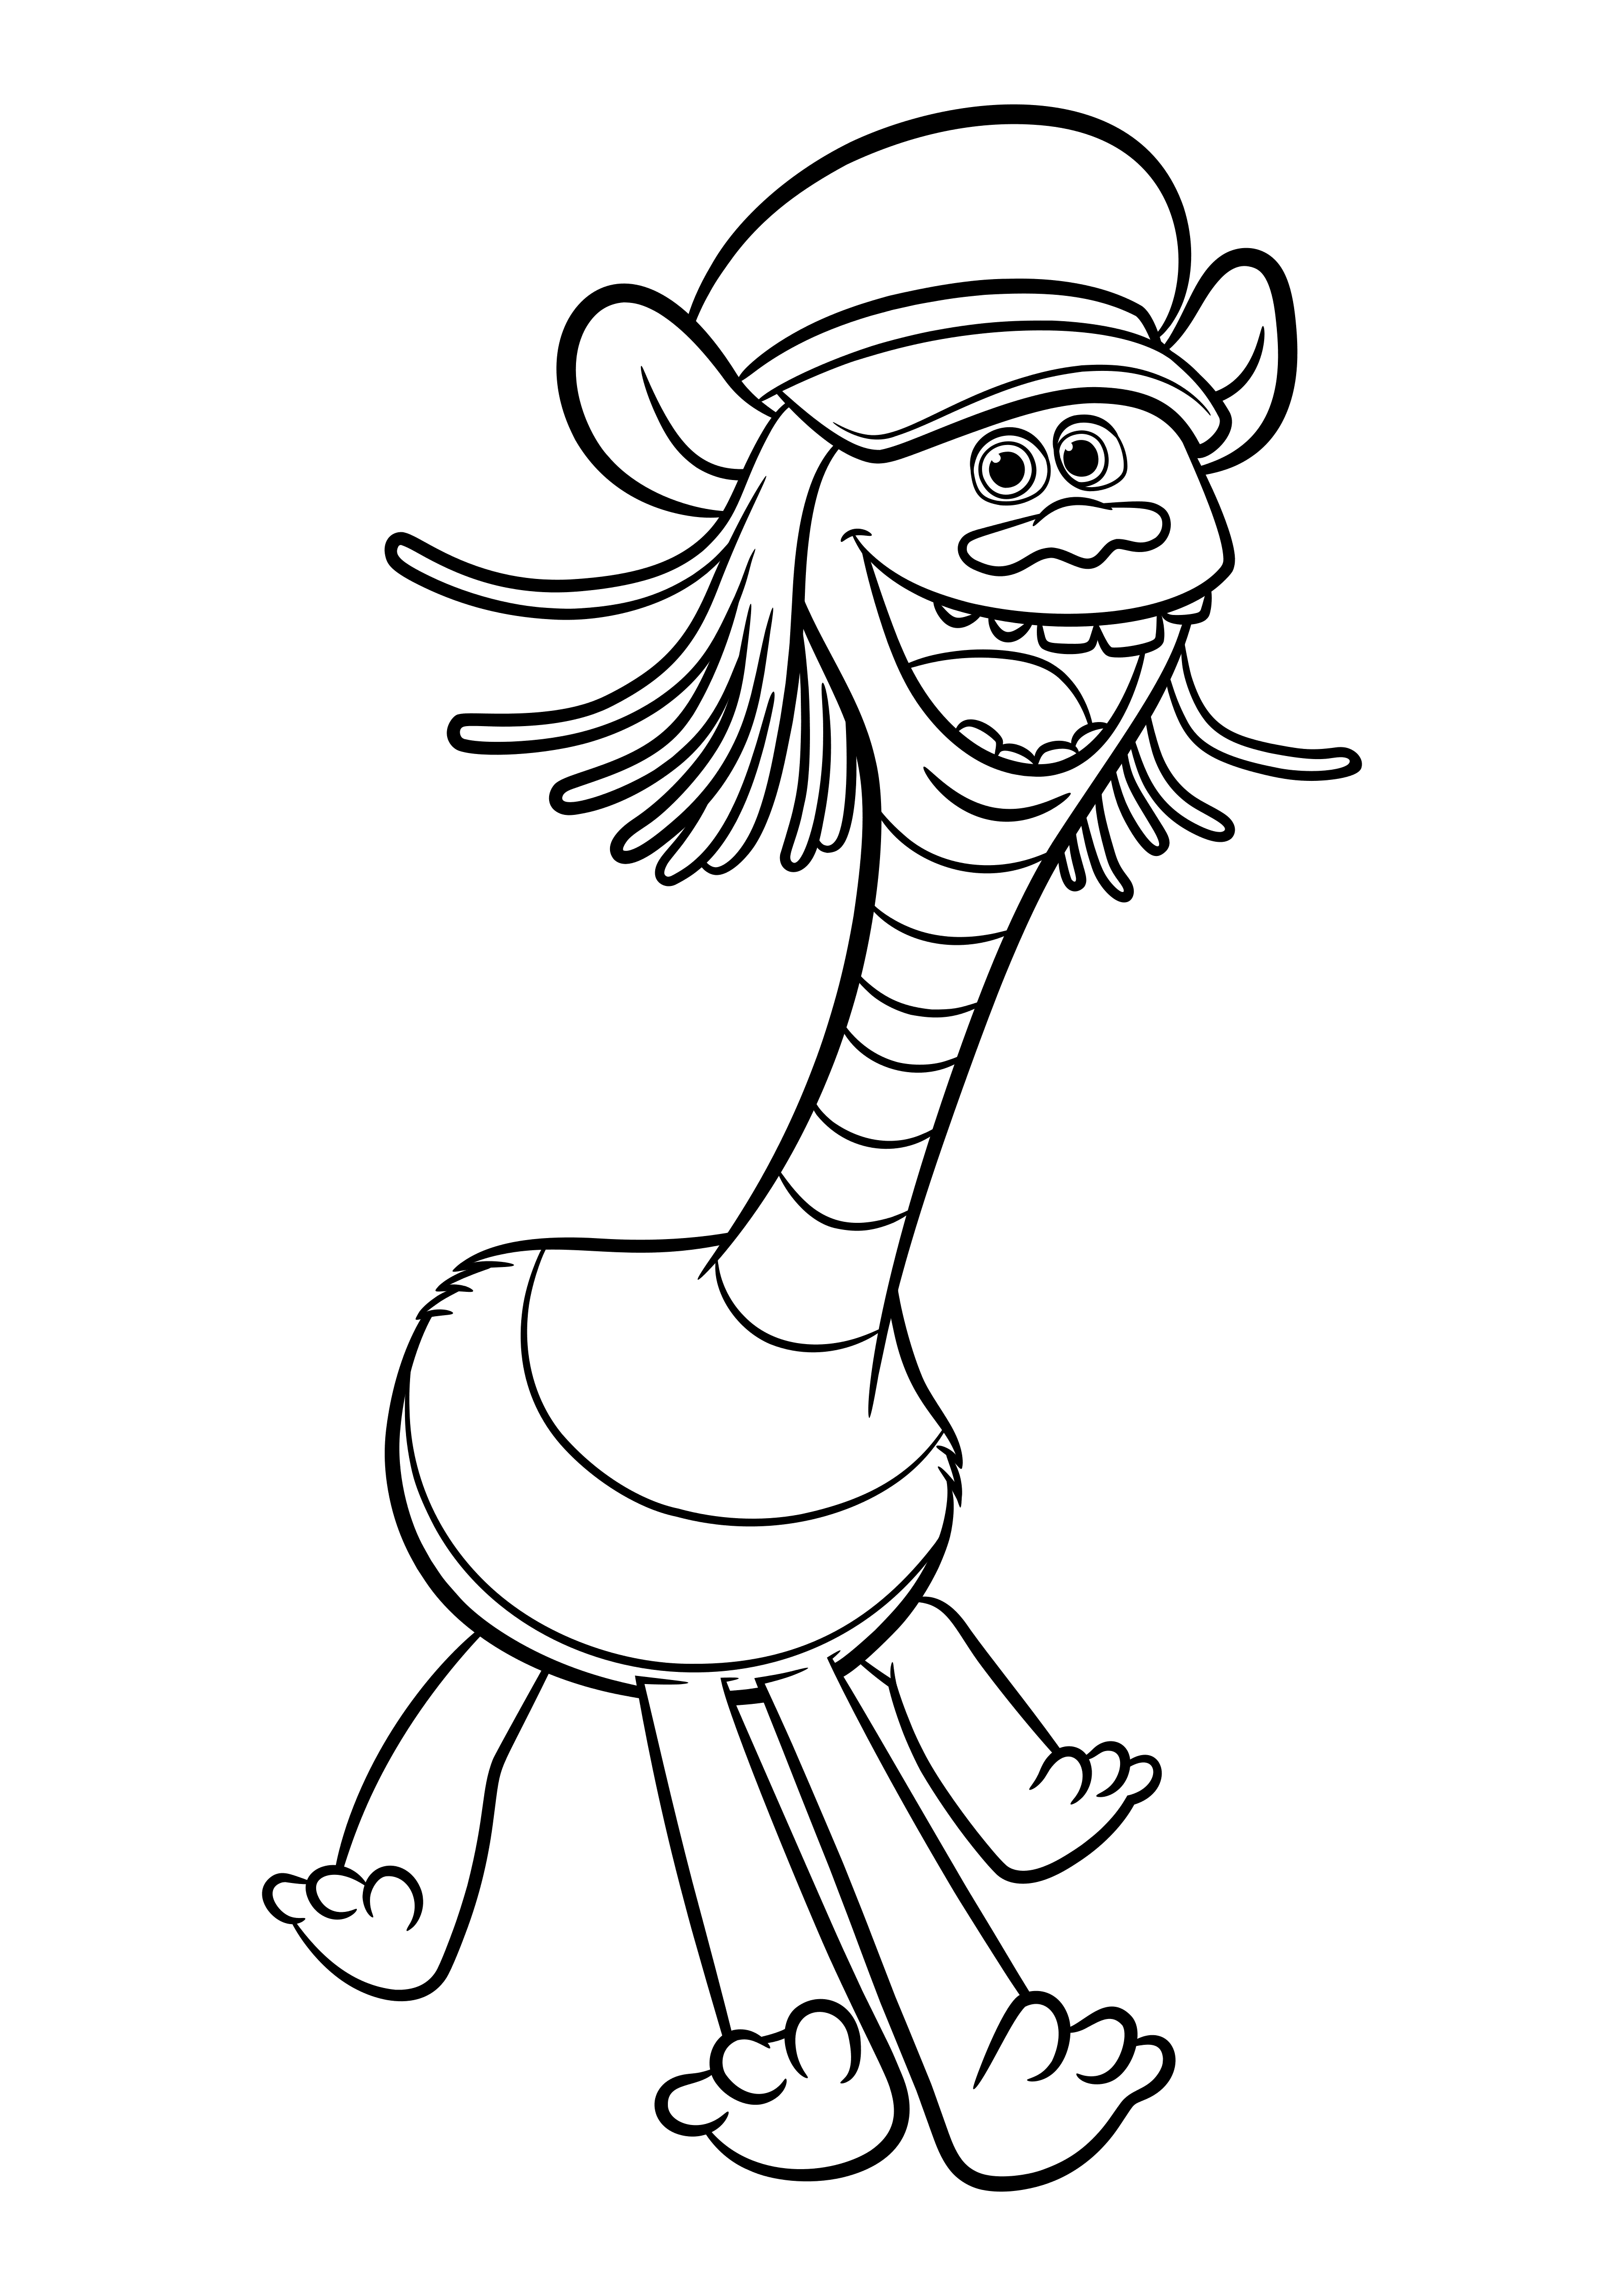 Coloring Pages For Free To Print 9